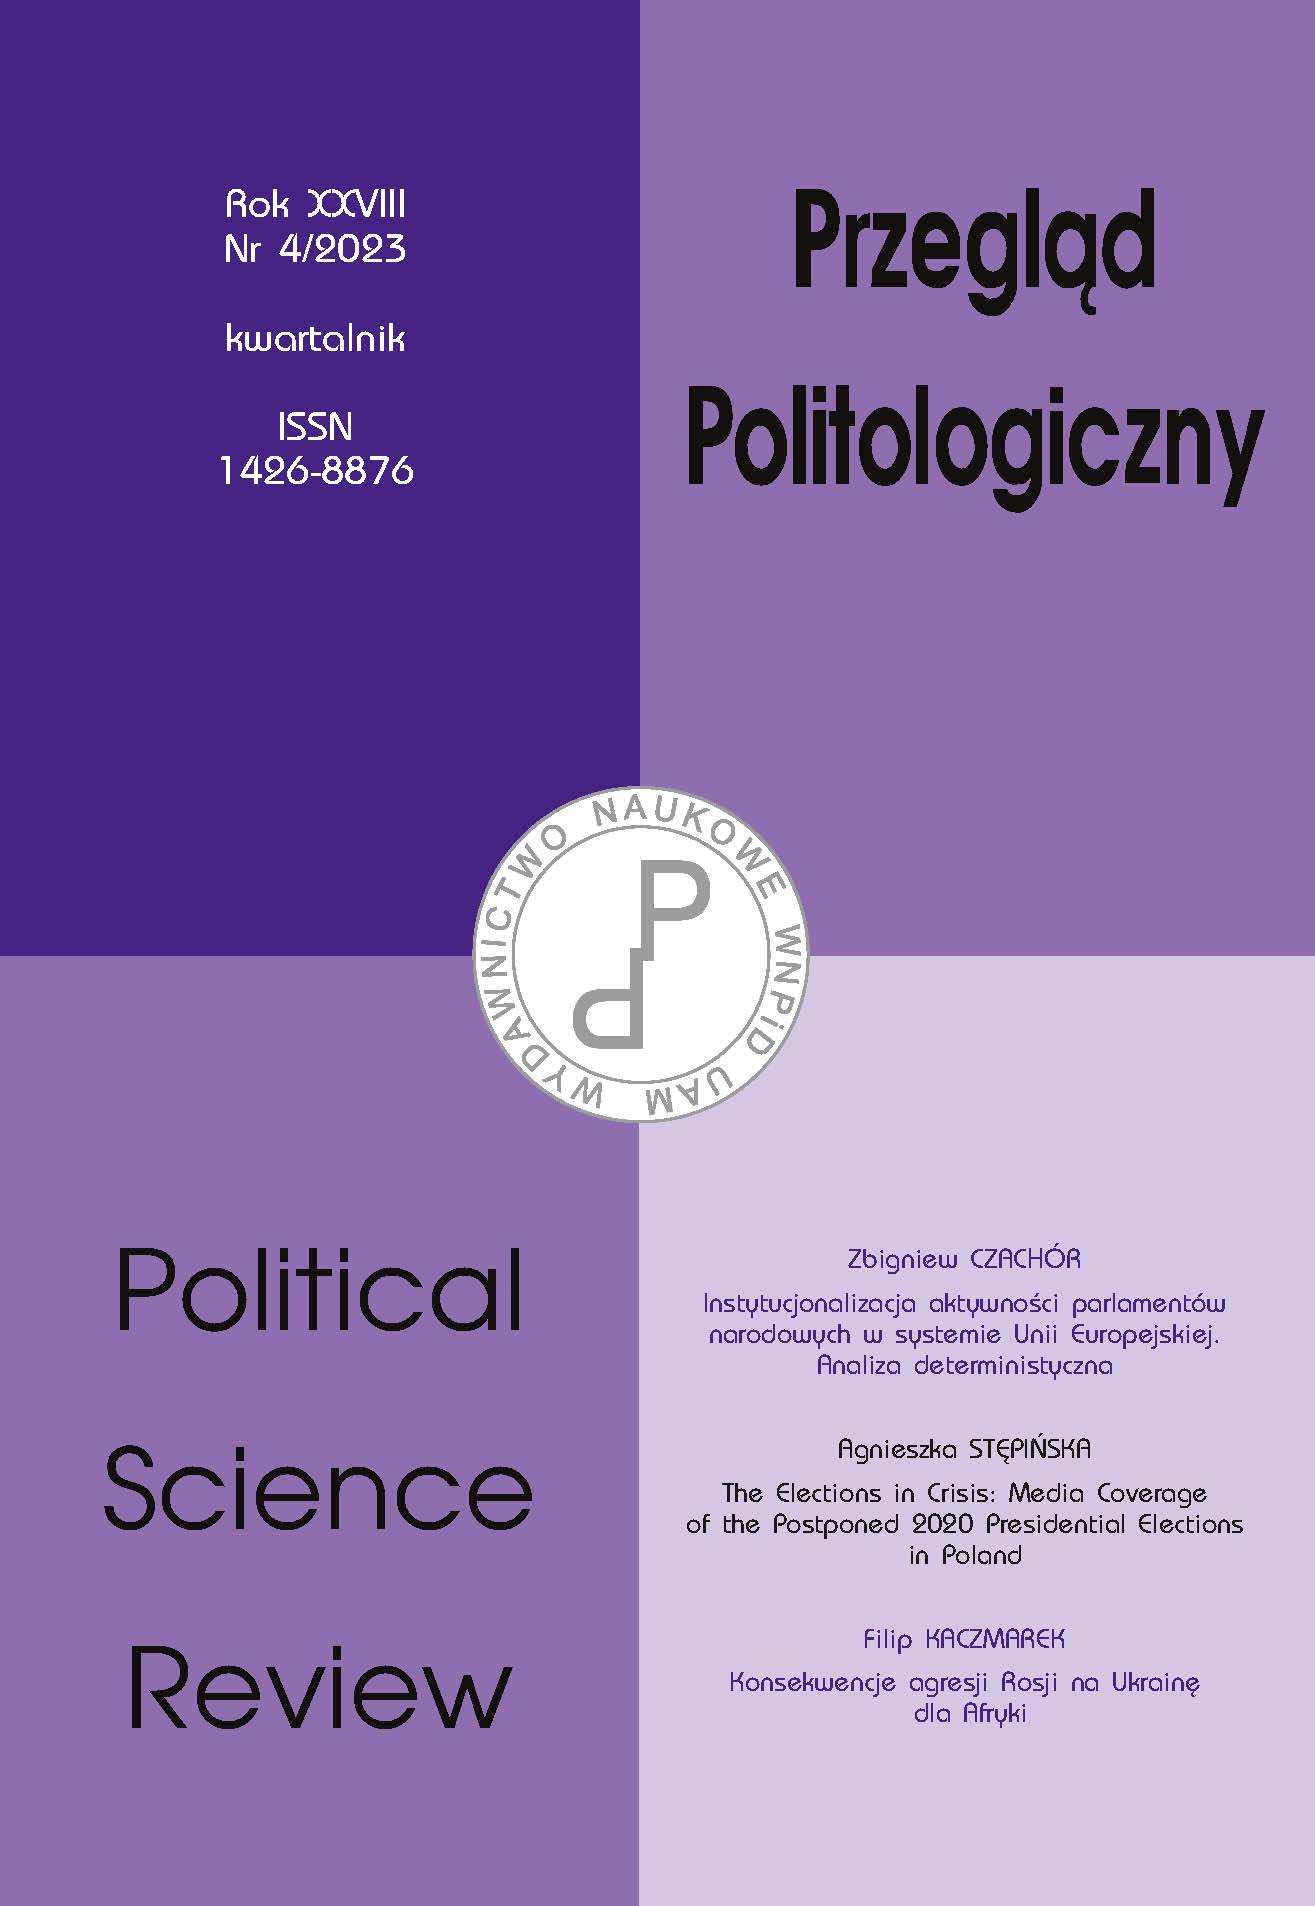 Anniversary Resolutions of the Polish Sejm and Senate as the Subject of Political Science Research